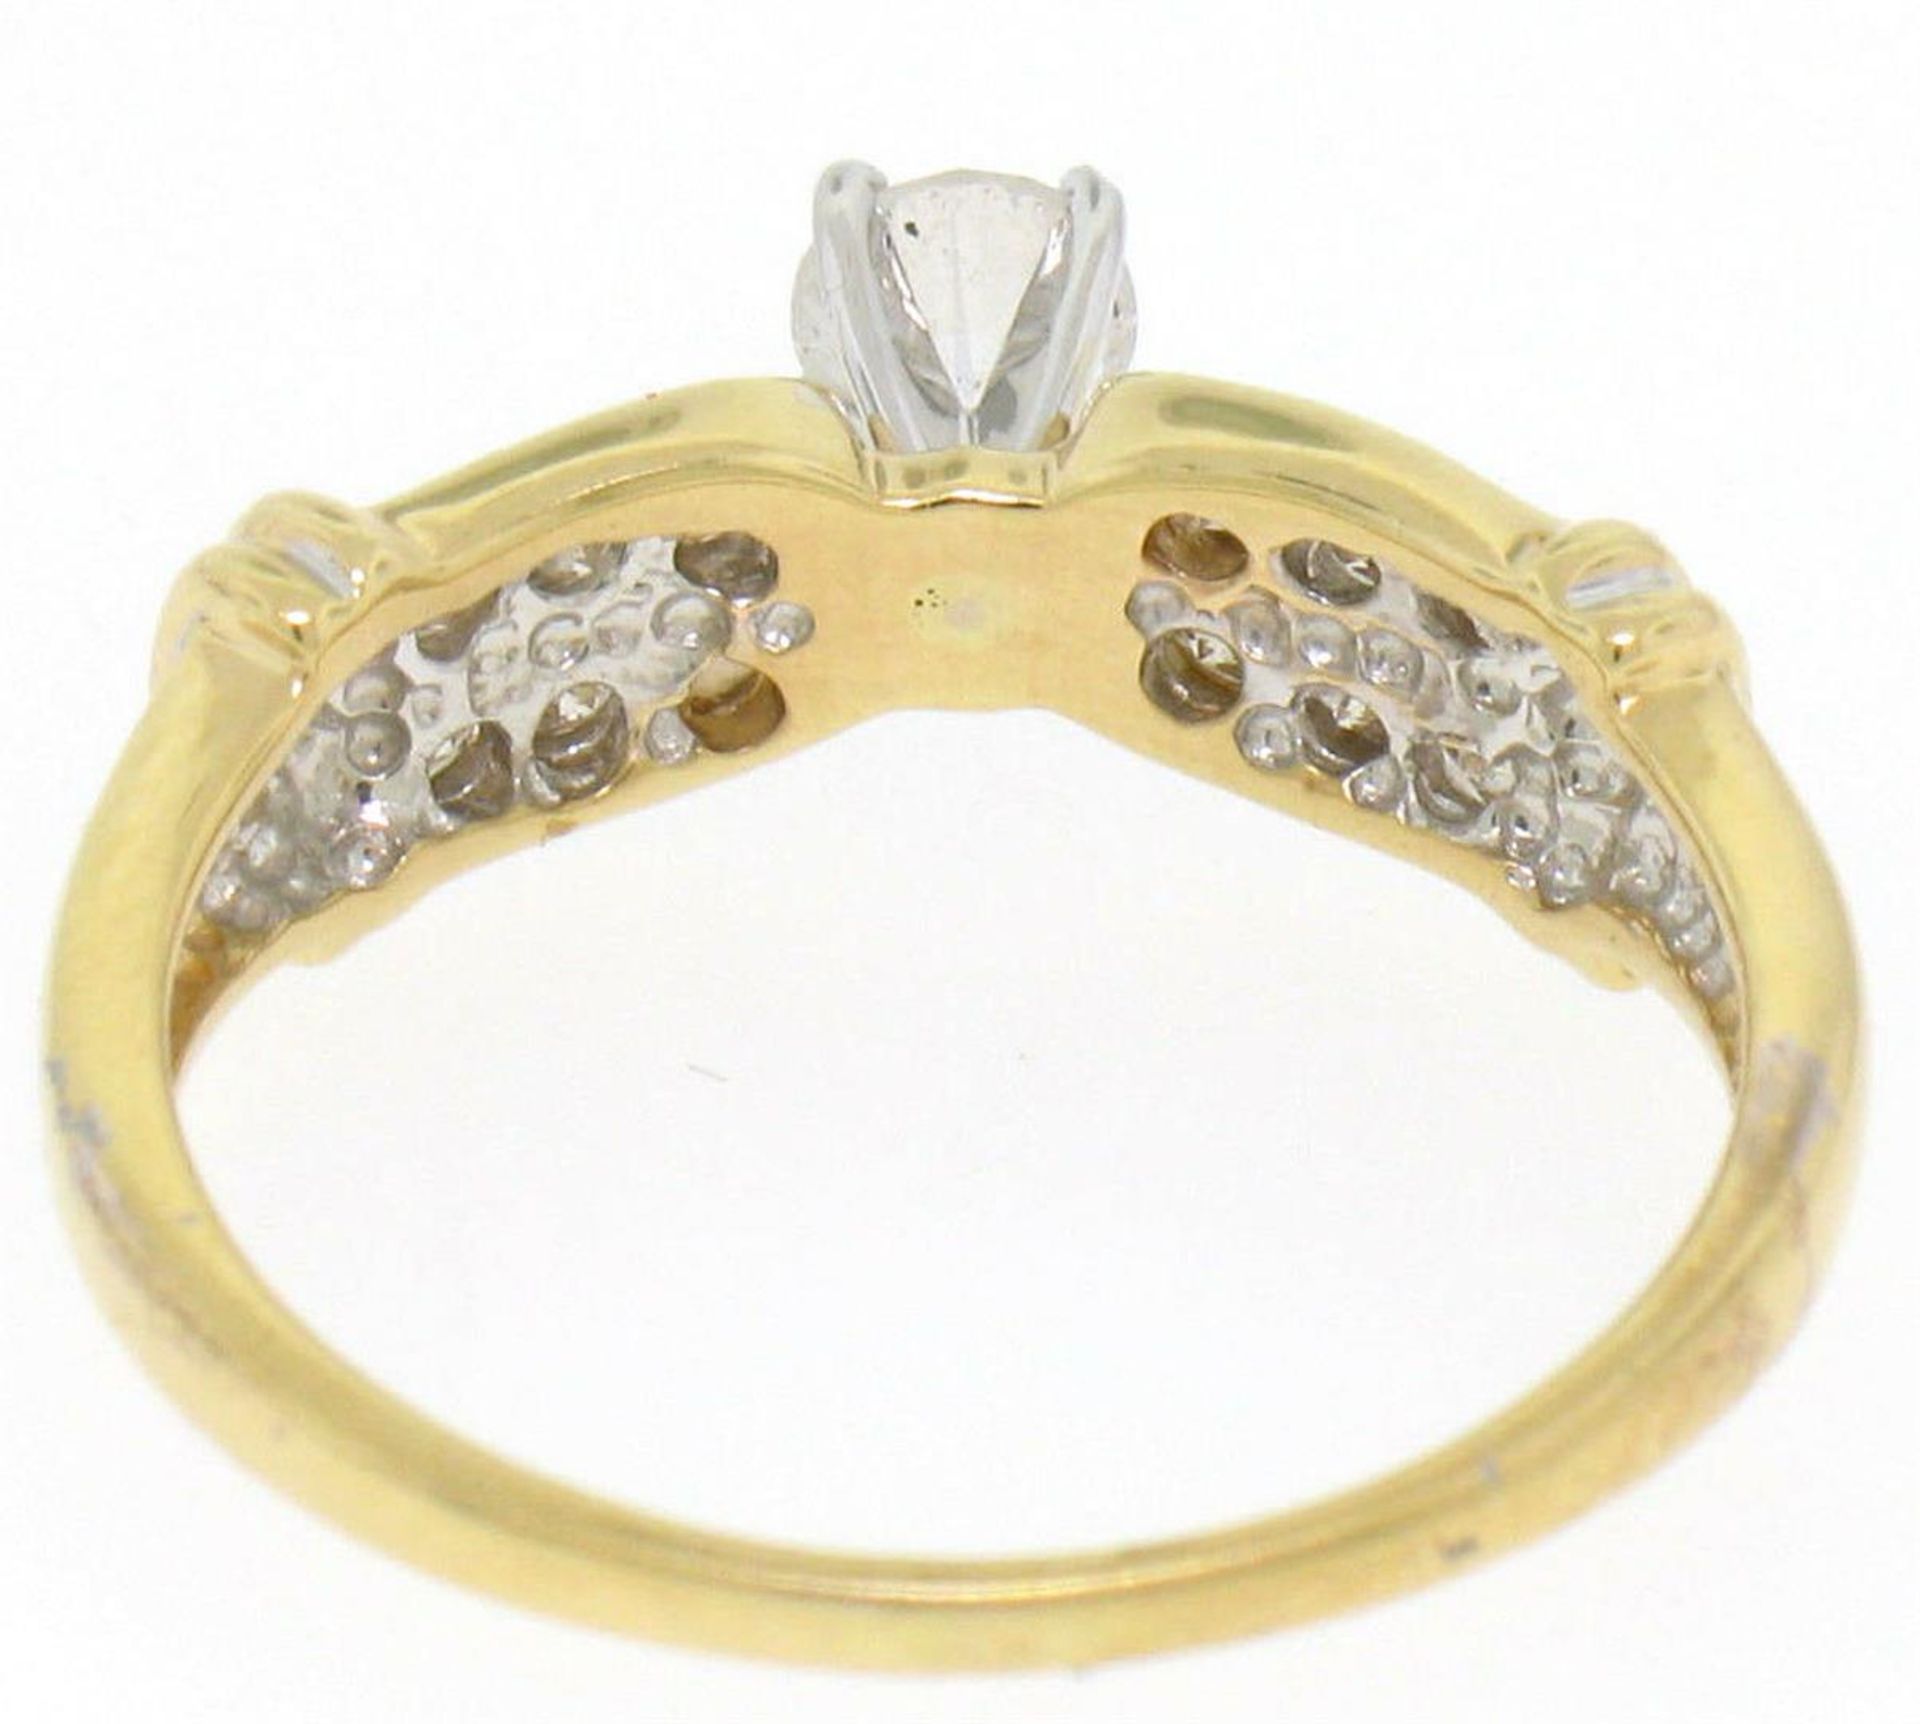 14k Yellow Gold 0.30ctw Round Diamond & Dual Row Channel Accent Engagement Ring - Image 6 of 6